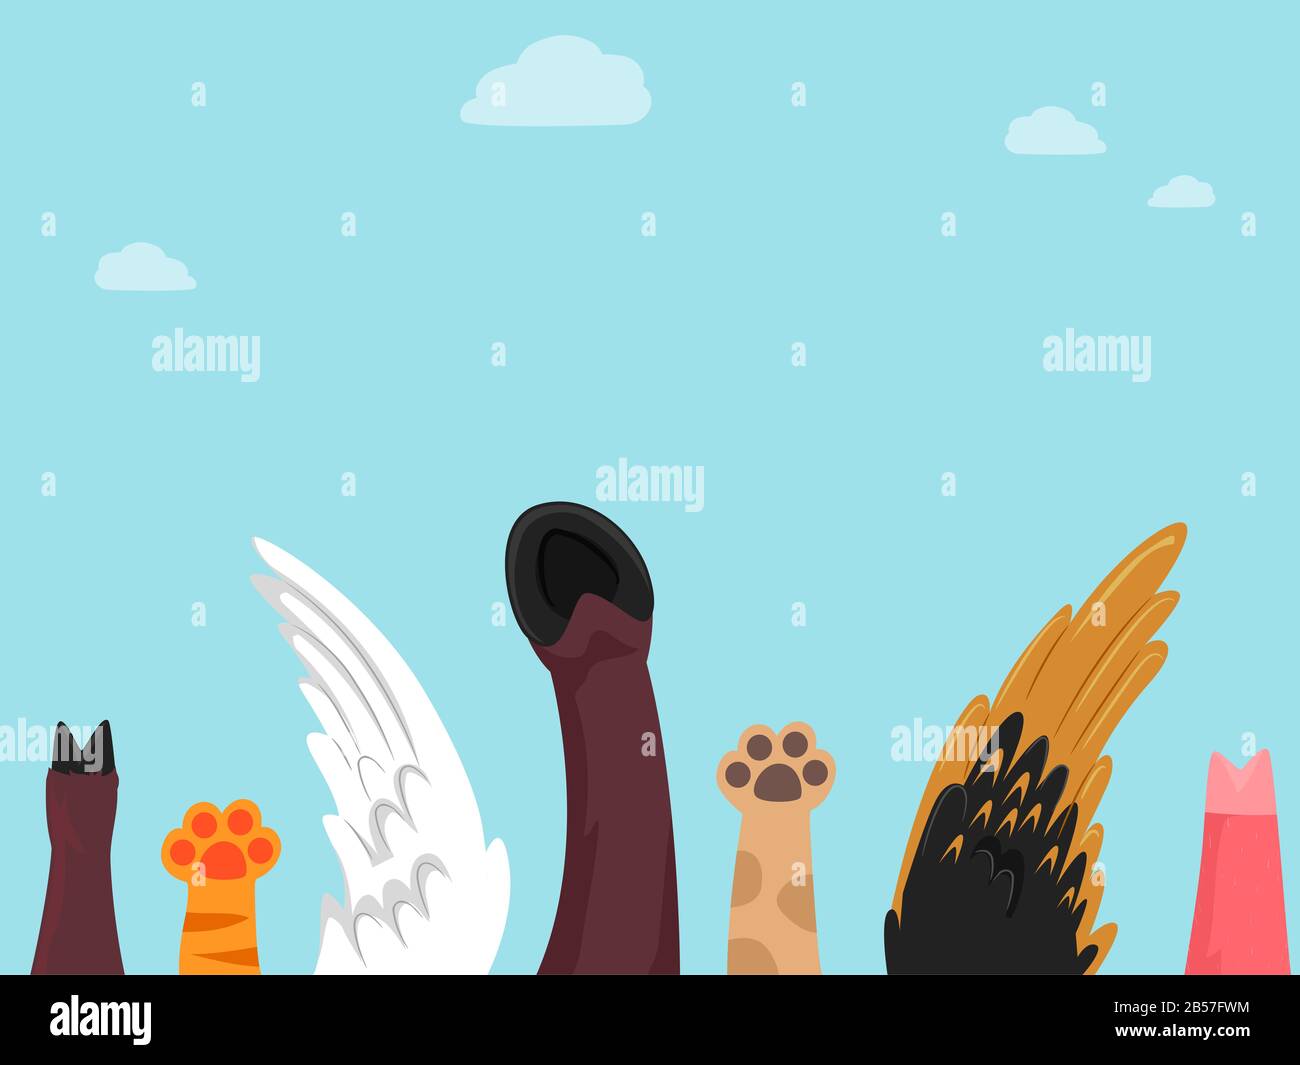 Illustration of Farm Animals Hands and Wings Raised, From Sheep, Cat, Duck, Horse, Dog, Chicken and Pig Stock Photo